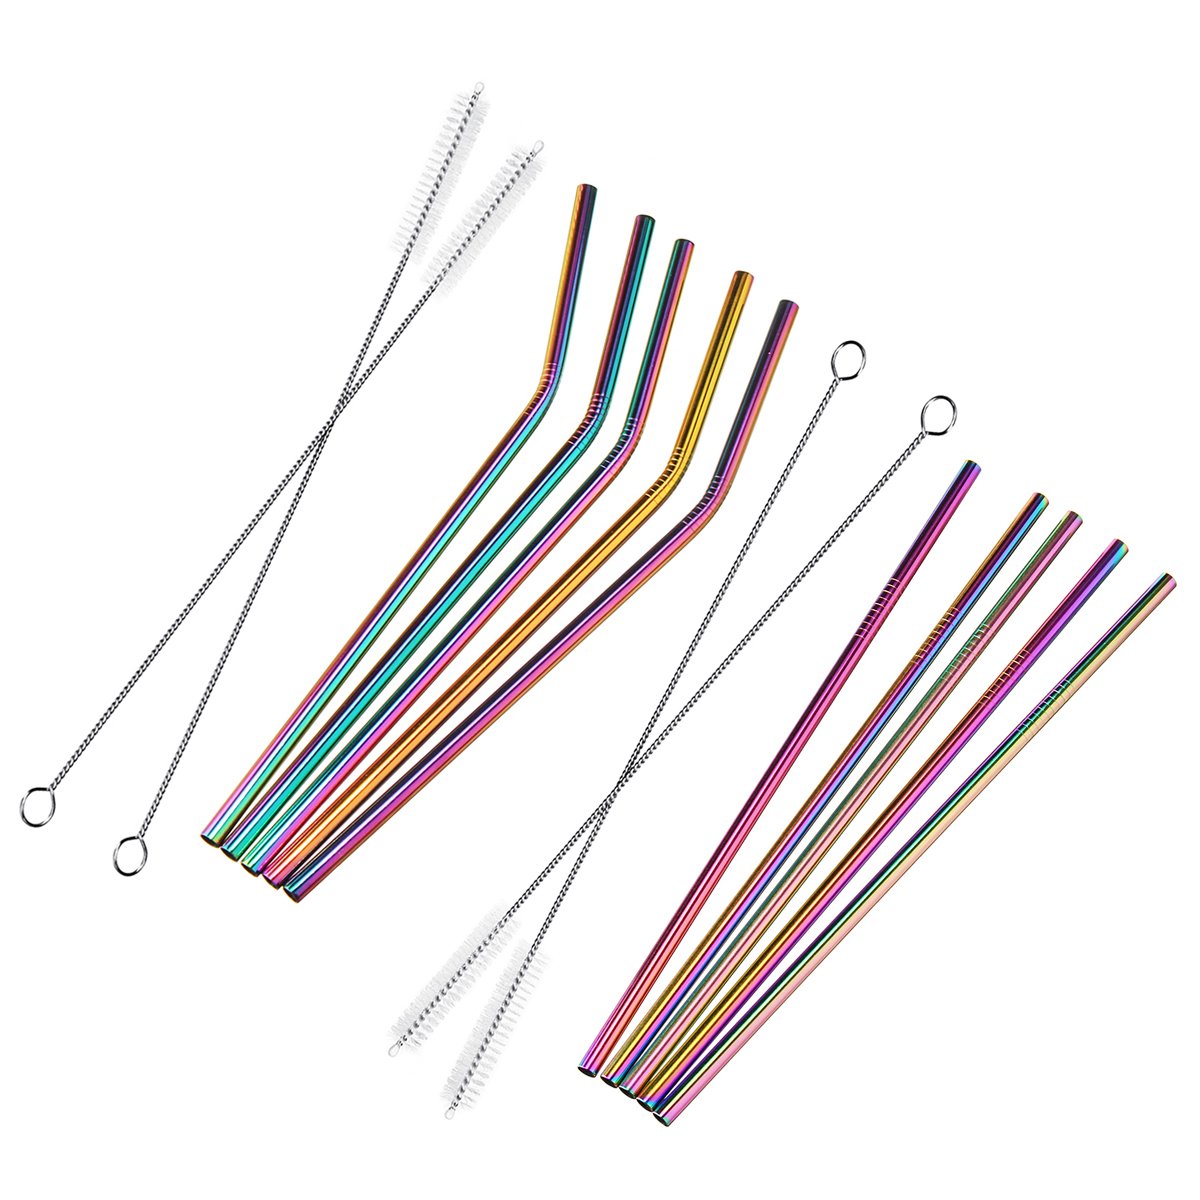 7PCS Premium Stainless Steel Metal Drinking Straw Reusable Straws Set With Cleaner Brushes 2